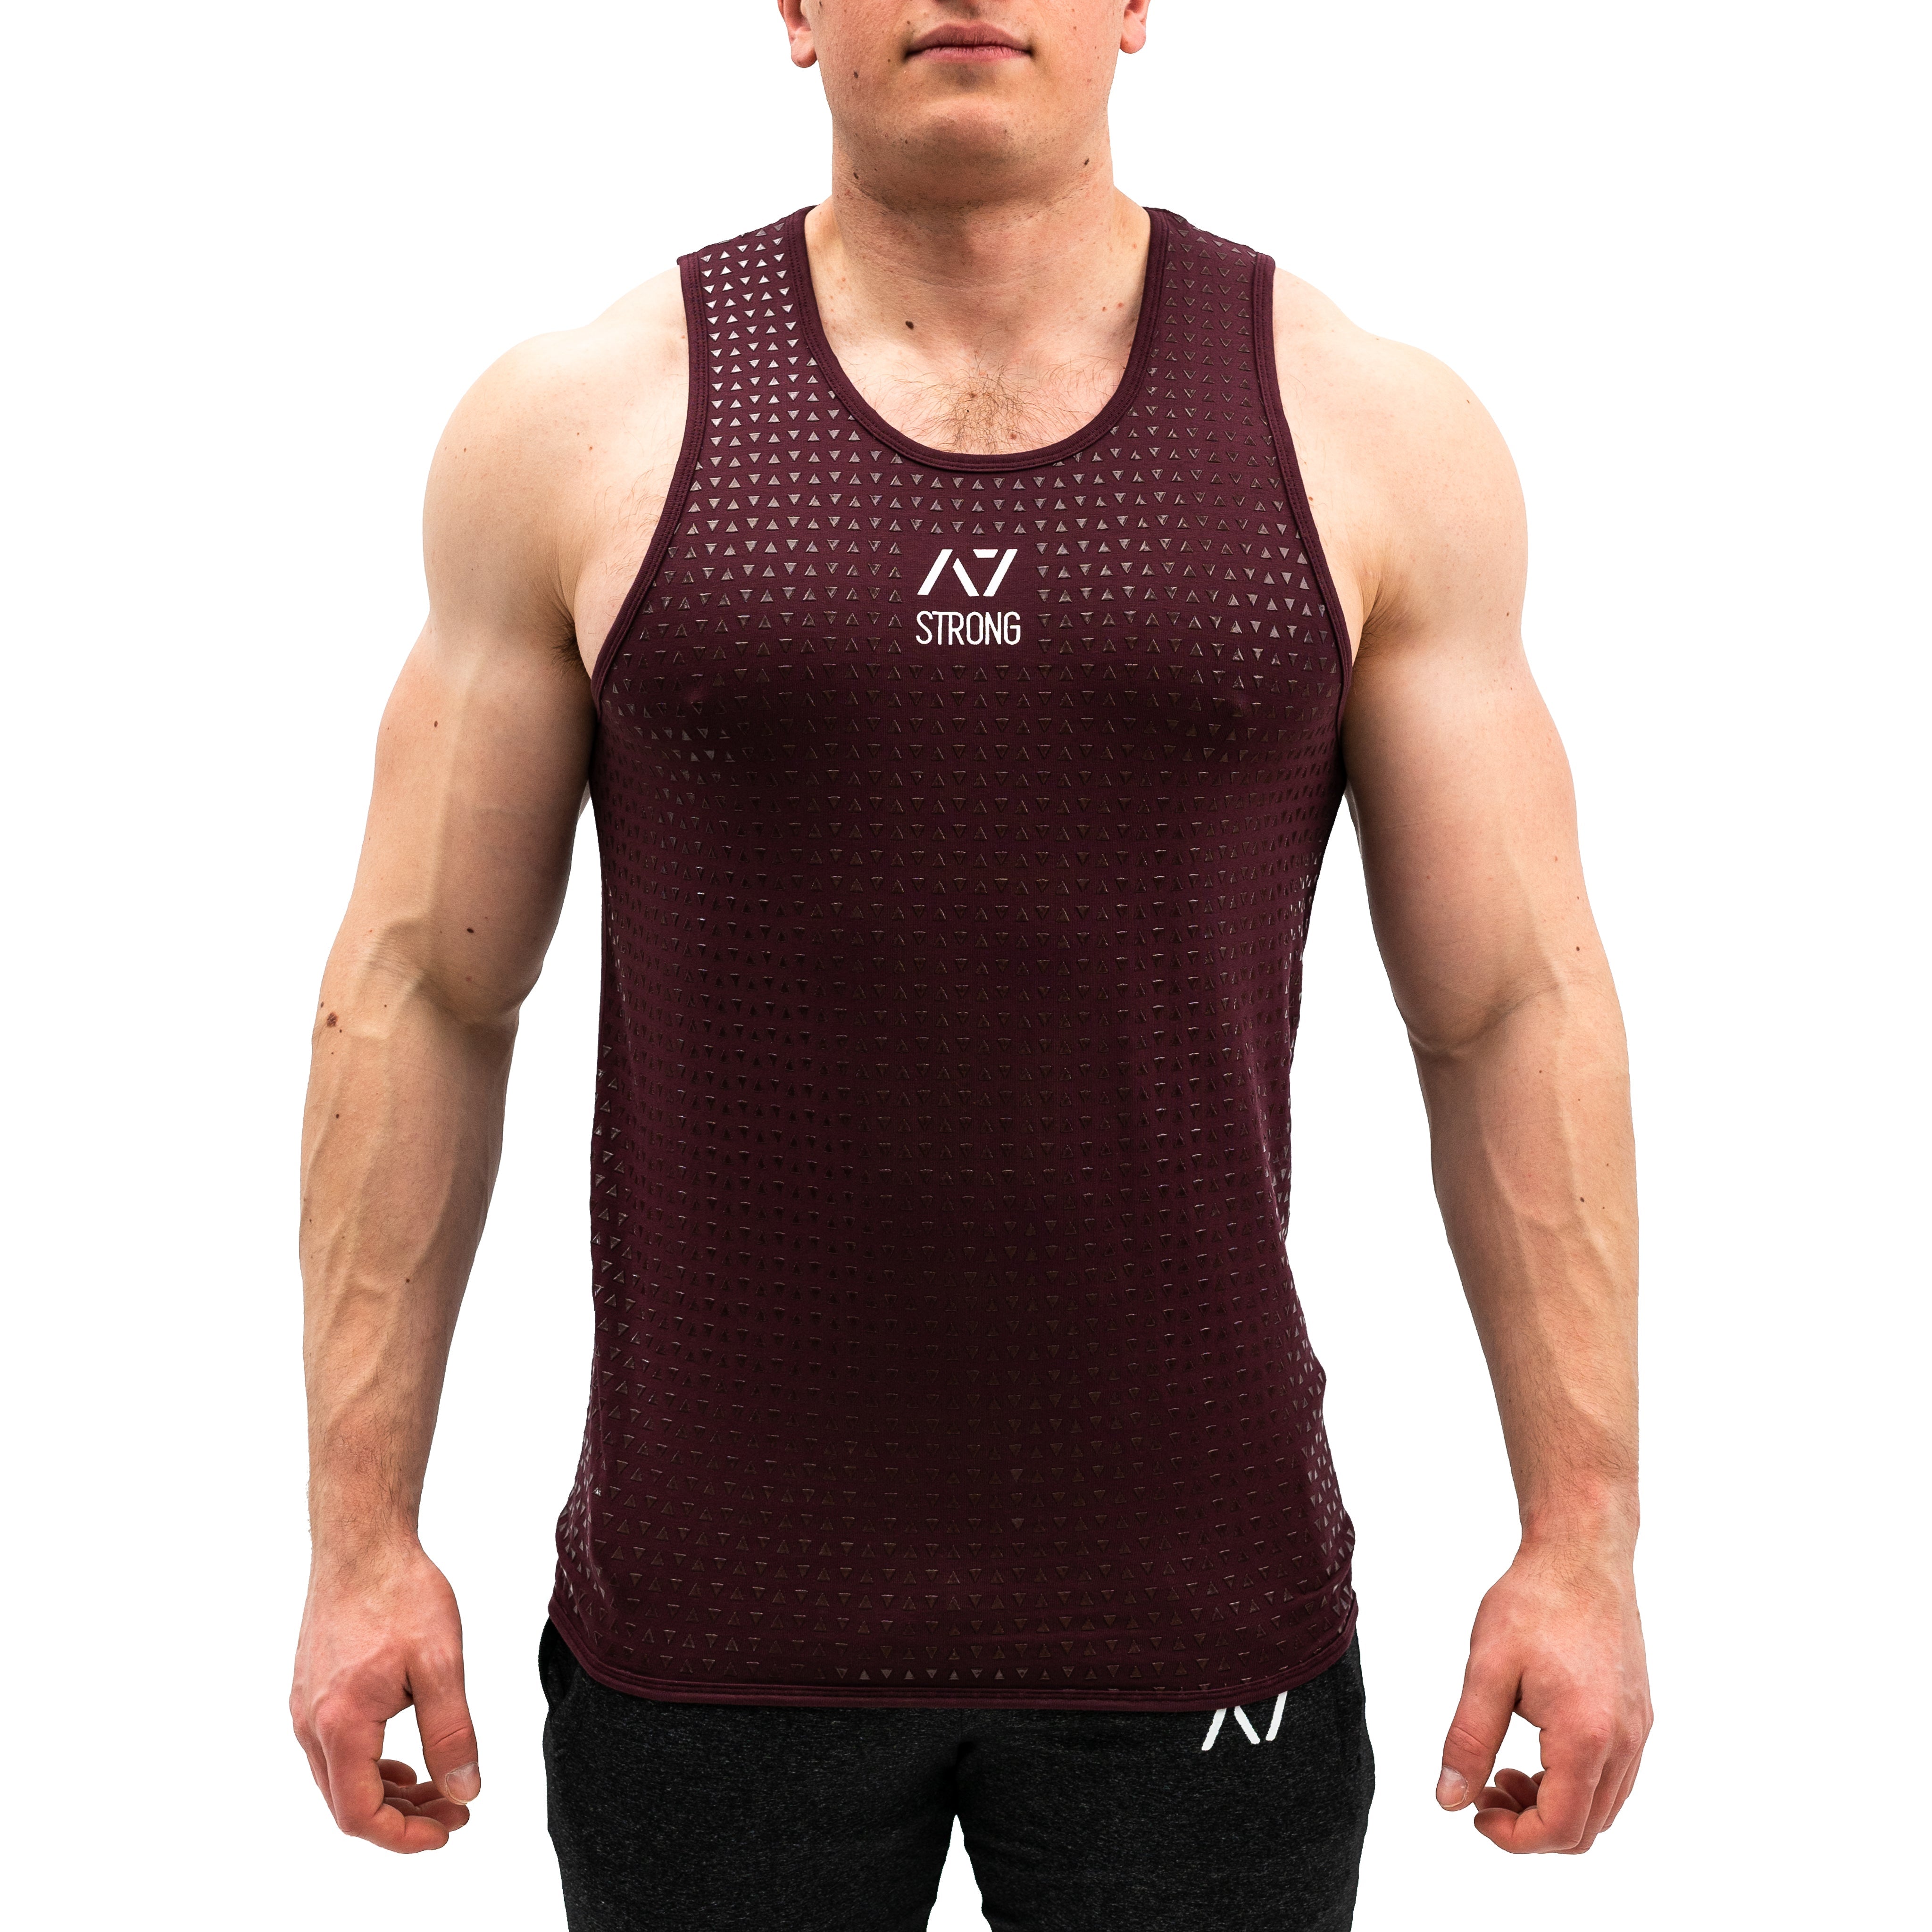 Strongman Trigon Tank, great for Strongman training. Purchase Strongman Trigon tank in UK from A7 UK. Purchase Strongman Trigon Tank in Europe from A7 Europe. No more chalk and no more sliding. Best Bar Grip Tshirts, shipping to UK and Europe from A7 UK. Strongman Trigon Tank is our newest strongman tank! A7UK supplies the best strongman apparel for all your workouts. Available in UK and Europe including France, Italy, Germany, the Netherlands, Sweden and Poland.